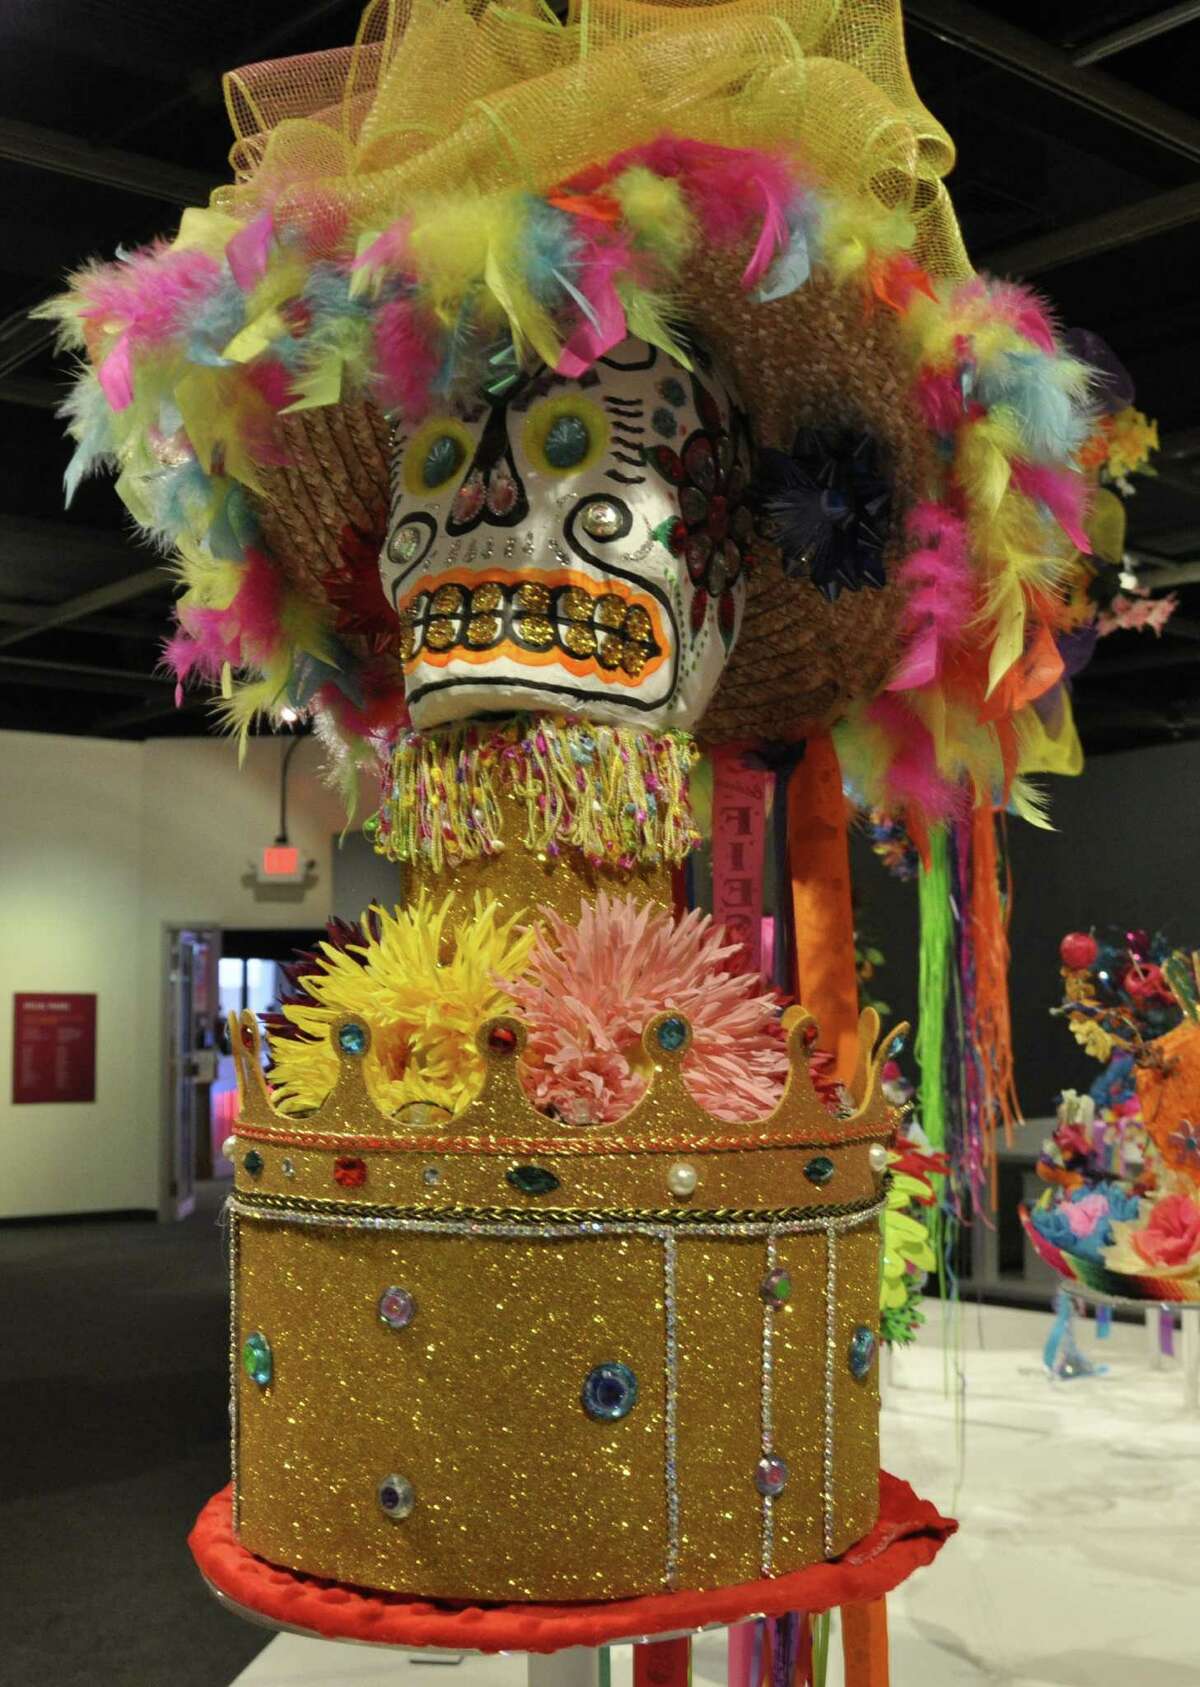 Mike Taylor's “King Hat of Hats” is also part of the exhibit.